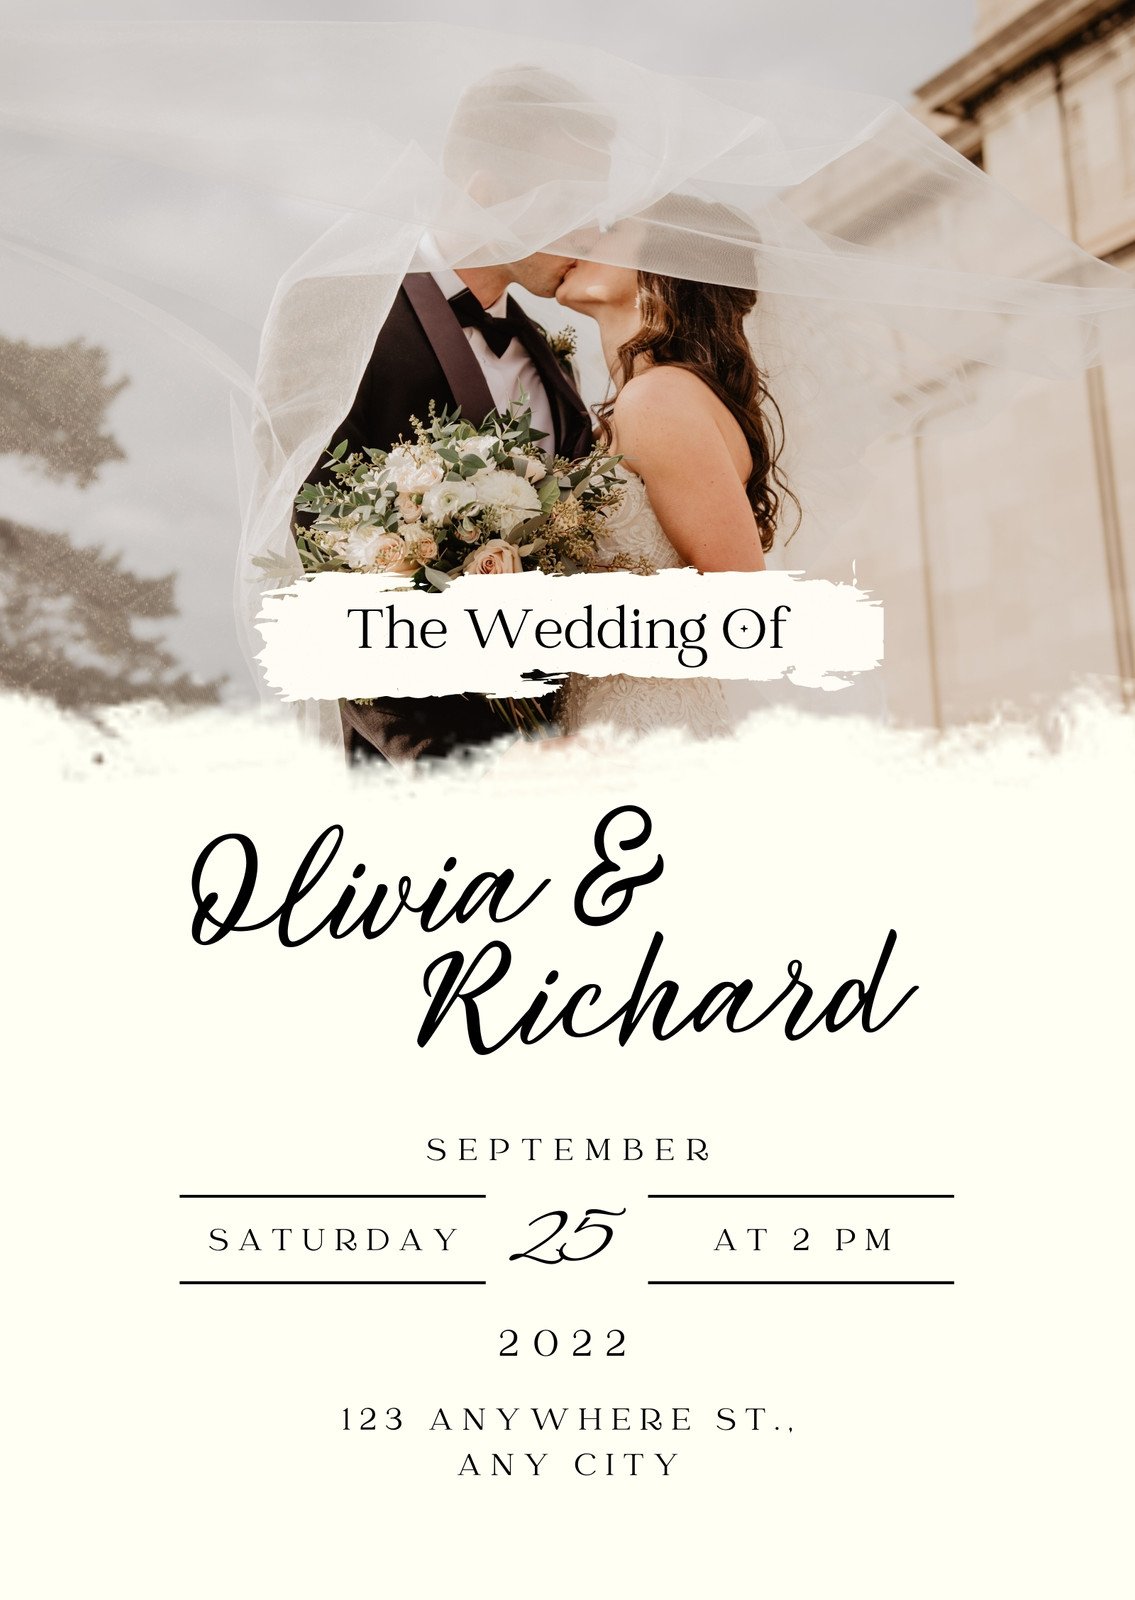 Wedding invitations with pictures